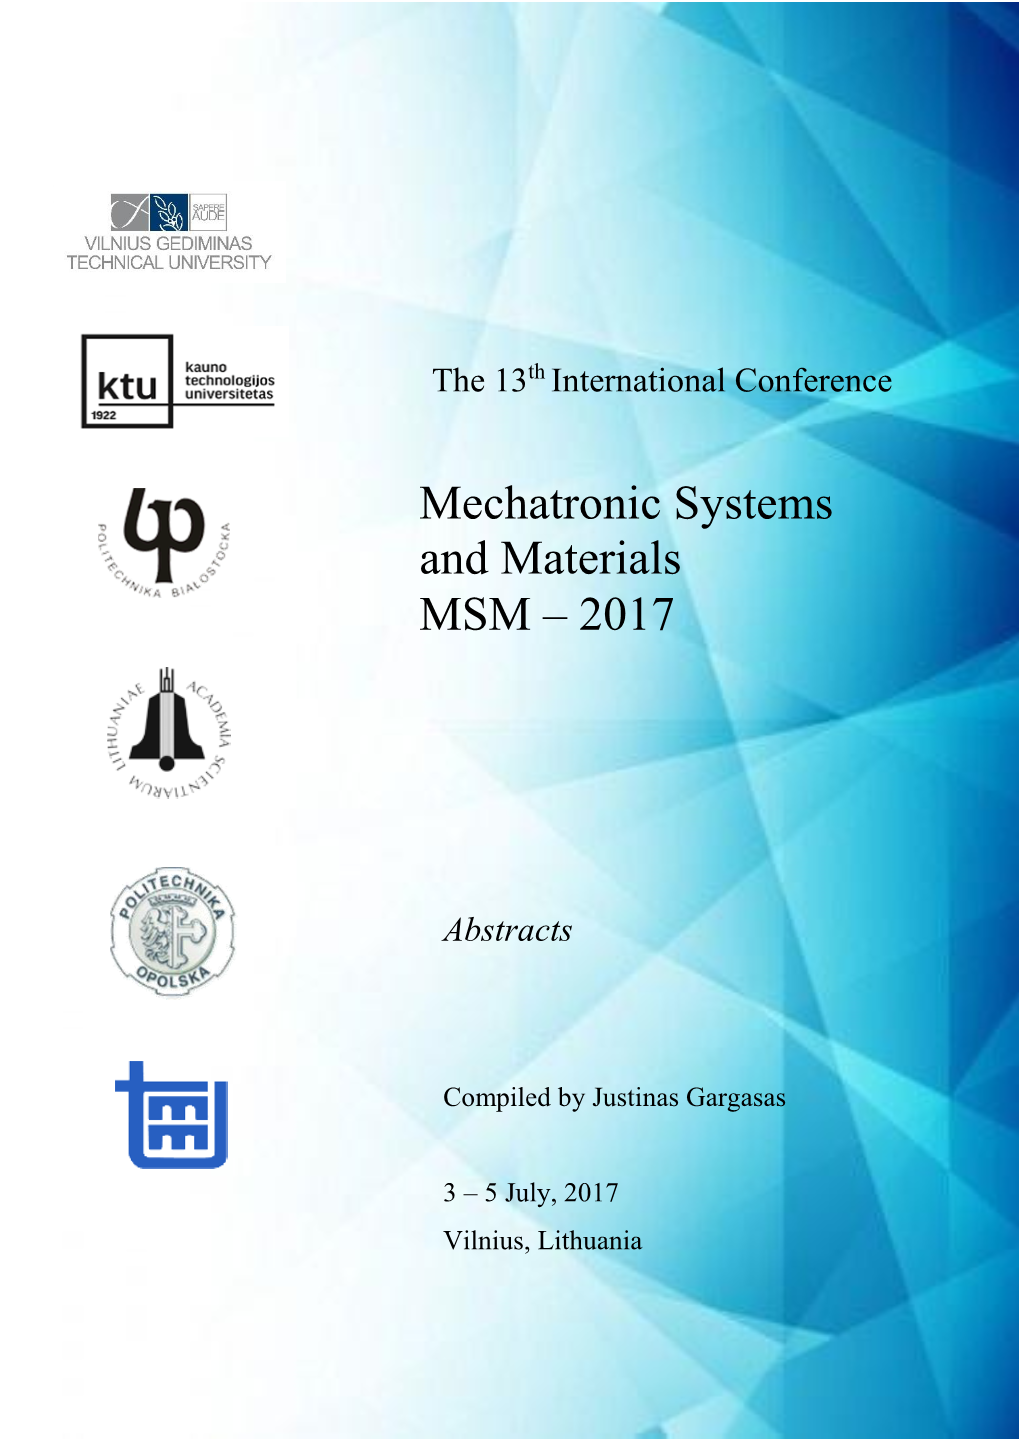 Mechatronic Systems and Materials MSM – 2017